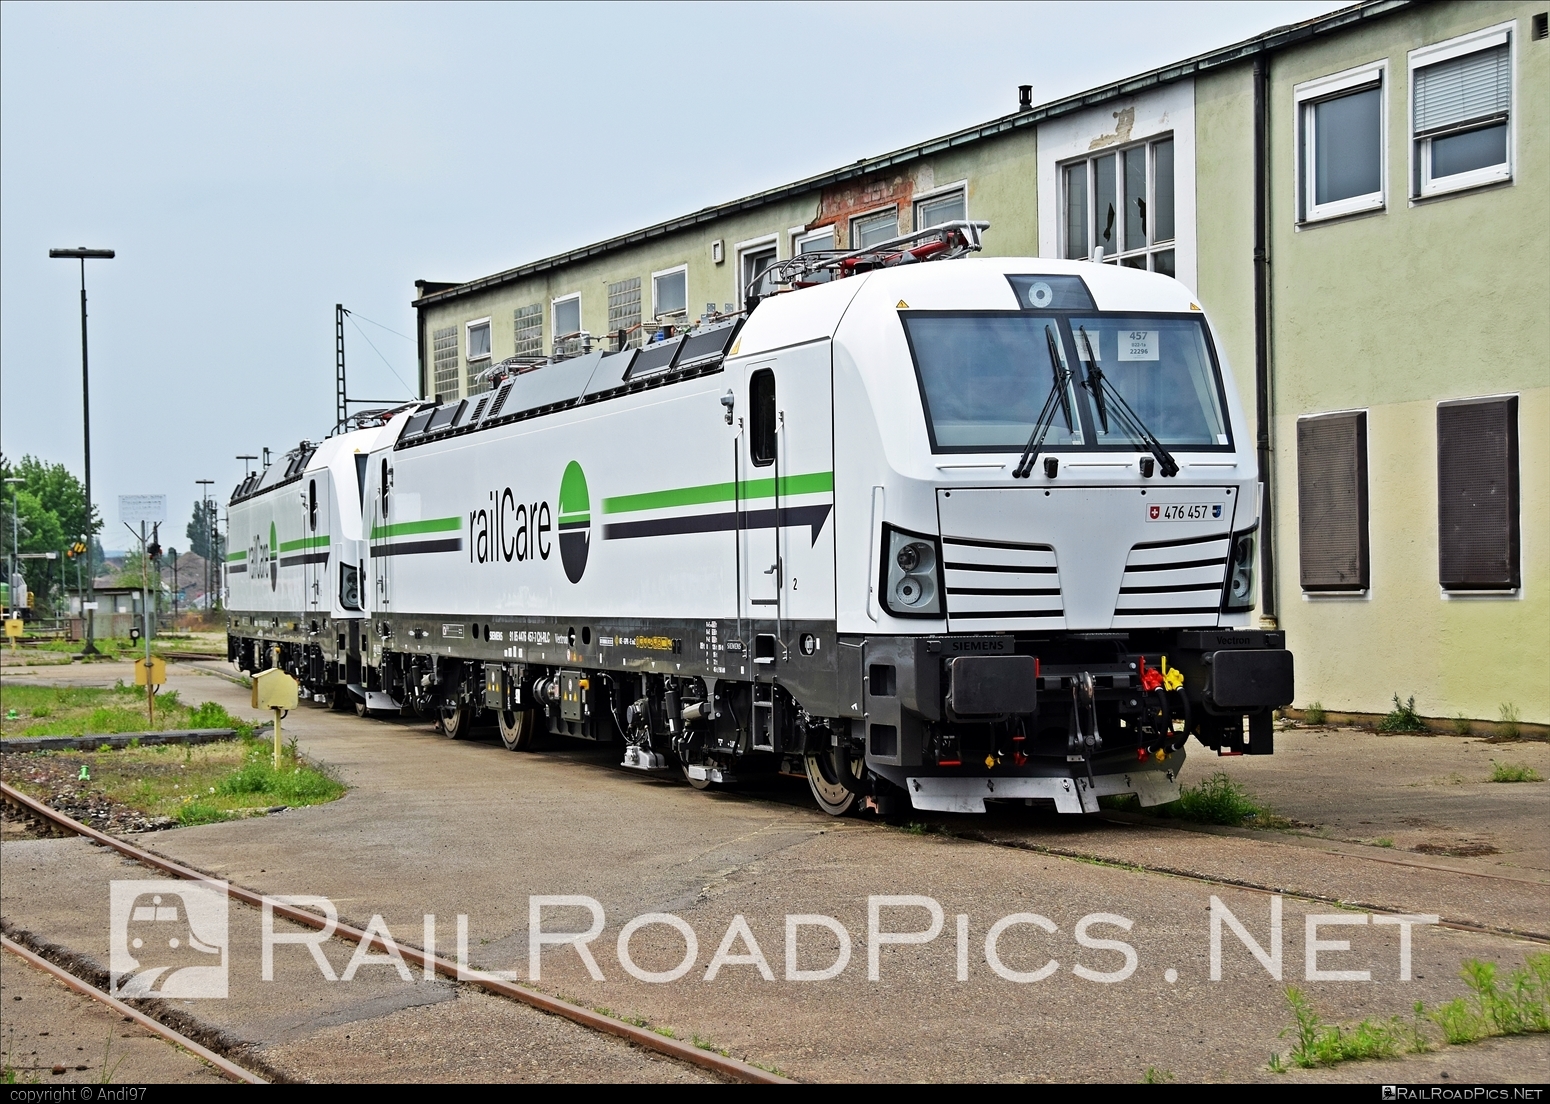 Siemens Vectron AC - 476 457 operated by railCare AG #railcare #rlc #siemens #siemensVectron #siemensVectronAC #vectron #vectronAC